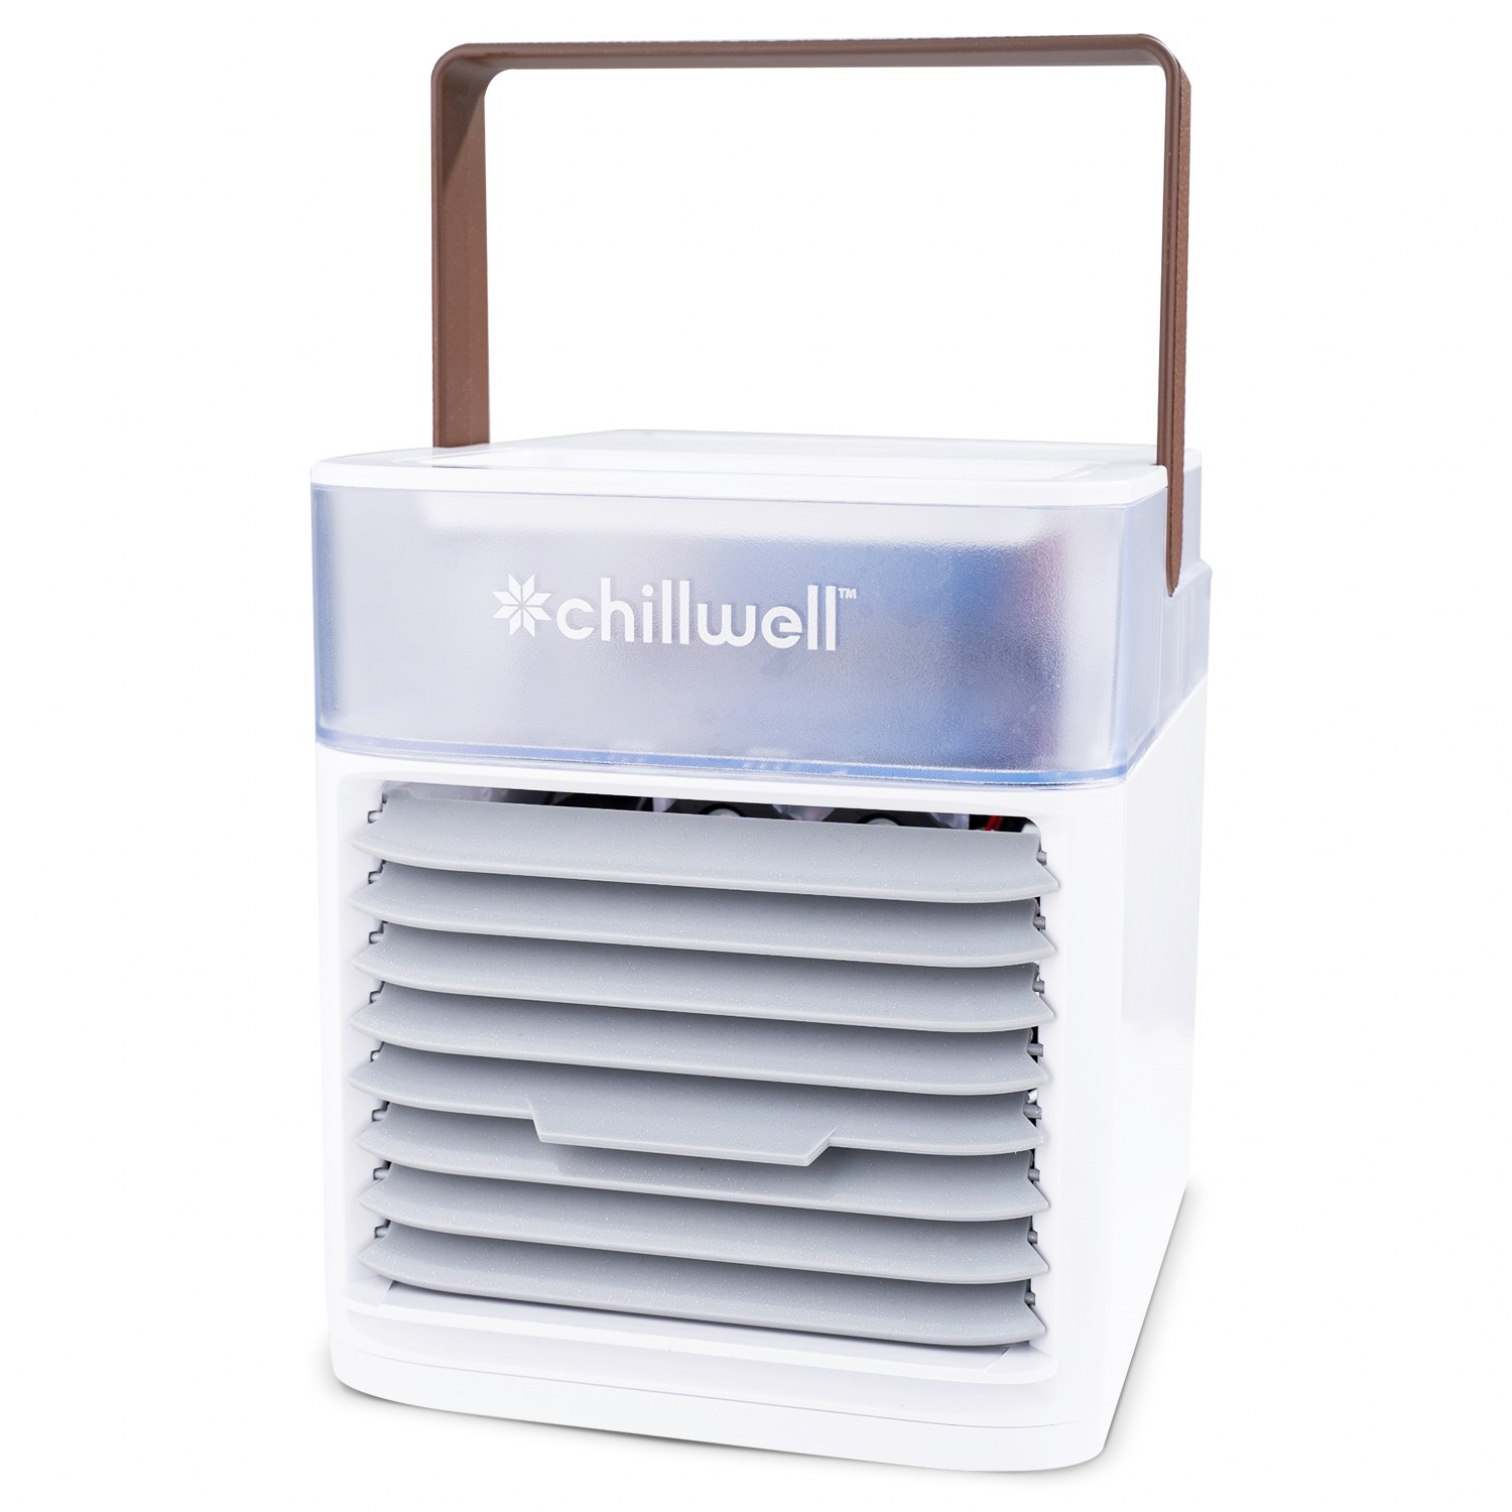 Chillwell Ac Room Air Conditioner